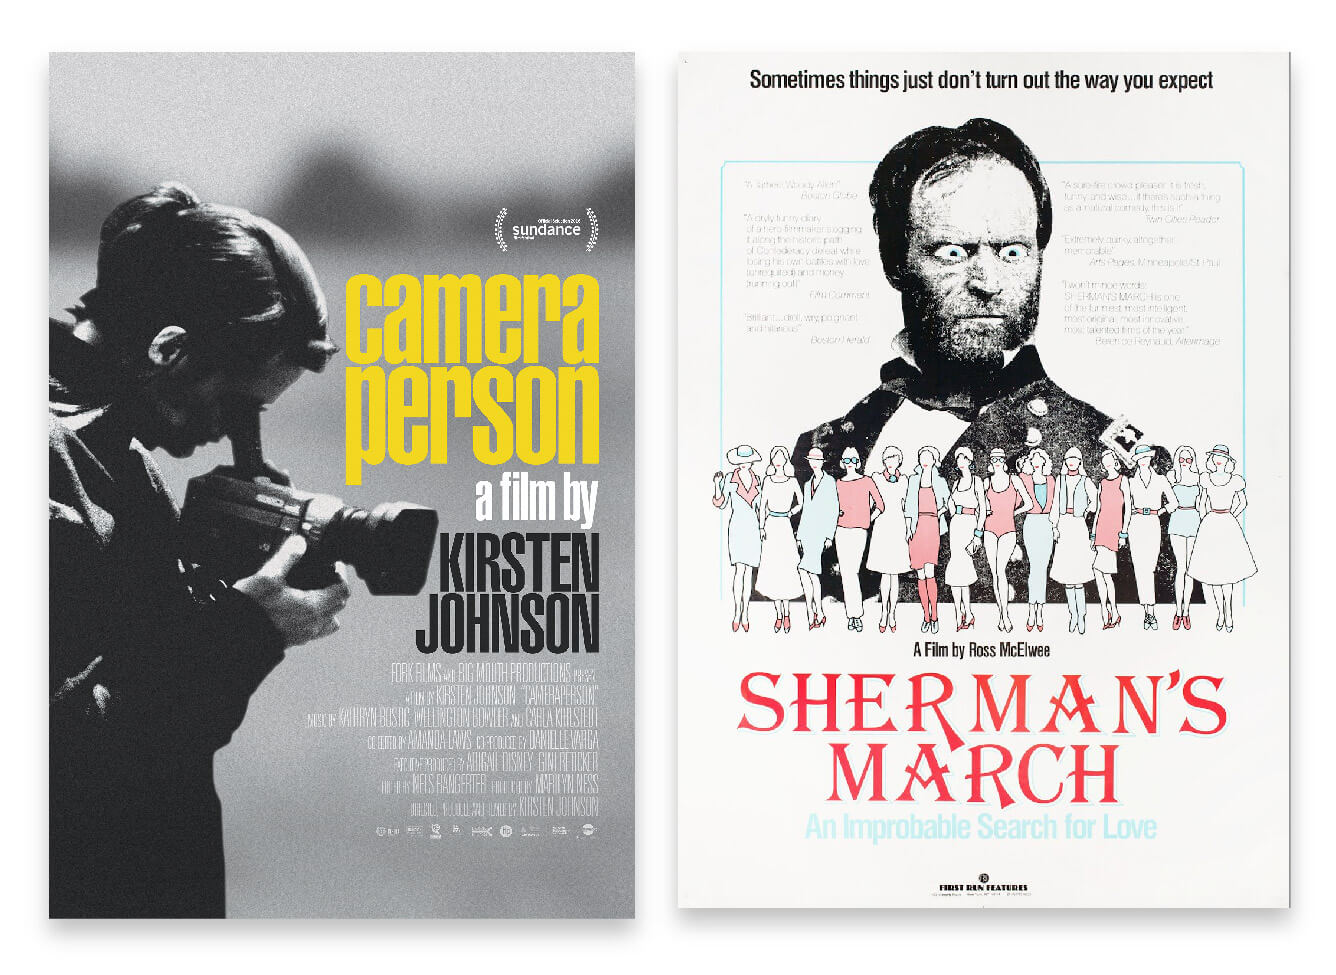 Kirsten Johnson’s Cameraperson and Ross McElwee’s Sherman’s March are just two examples of films that changed the way we look at cinema and memoir.